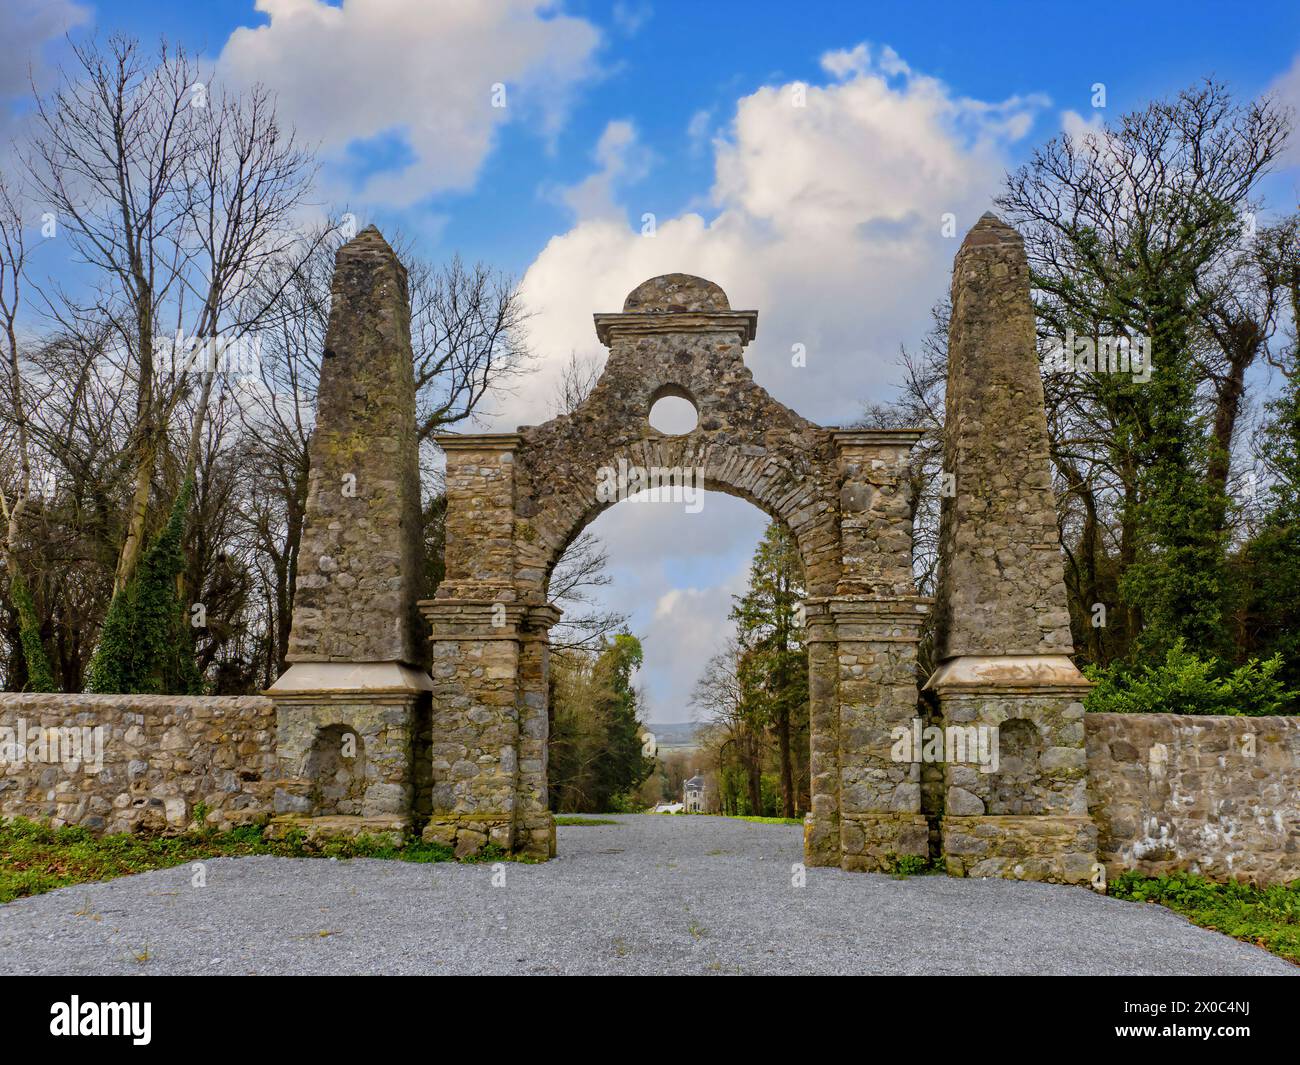 The 18th-century Gloster Archway folly in the demesne of Gloster House near Shinrone in County Offaly. Stock Photo